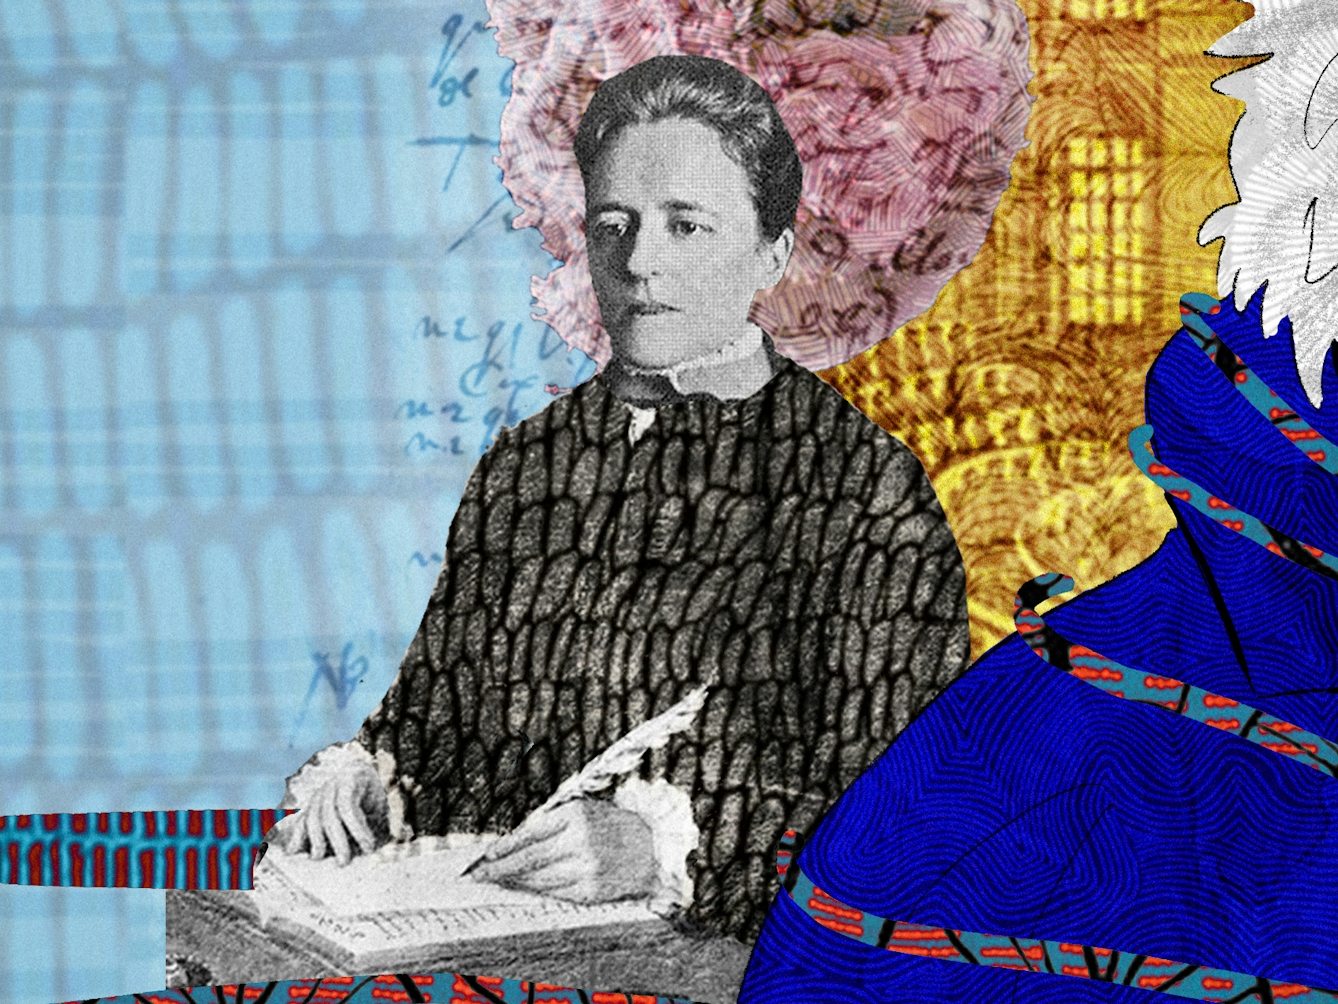 An abstract digital illustration featuring a head and shoulders portrait of a man in profile facing right, smoking a pipe, depicting the writer Jacques Derrida. To the left we see a female writing with a quill, depicting the diarist Alice James. In the background is a collage of handwritten notes and archive material depictions of a lecture theatre and x-rays.